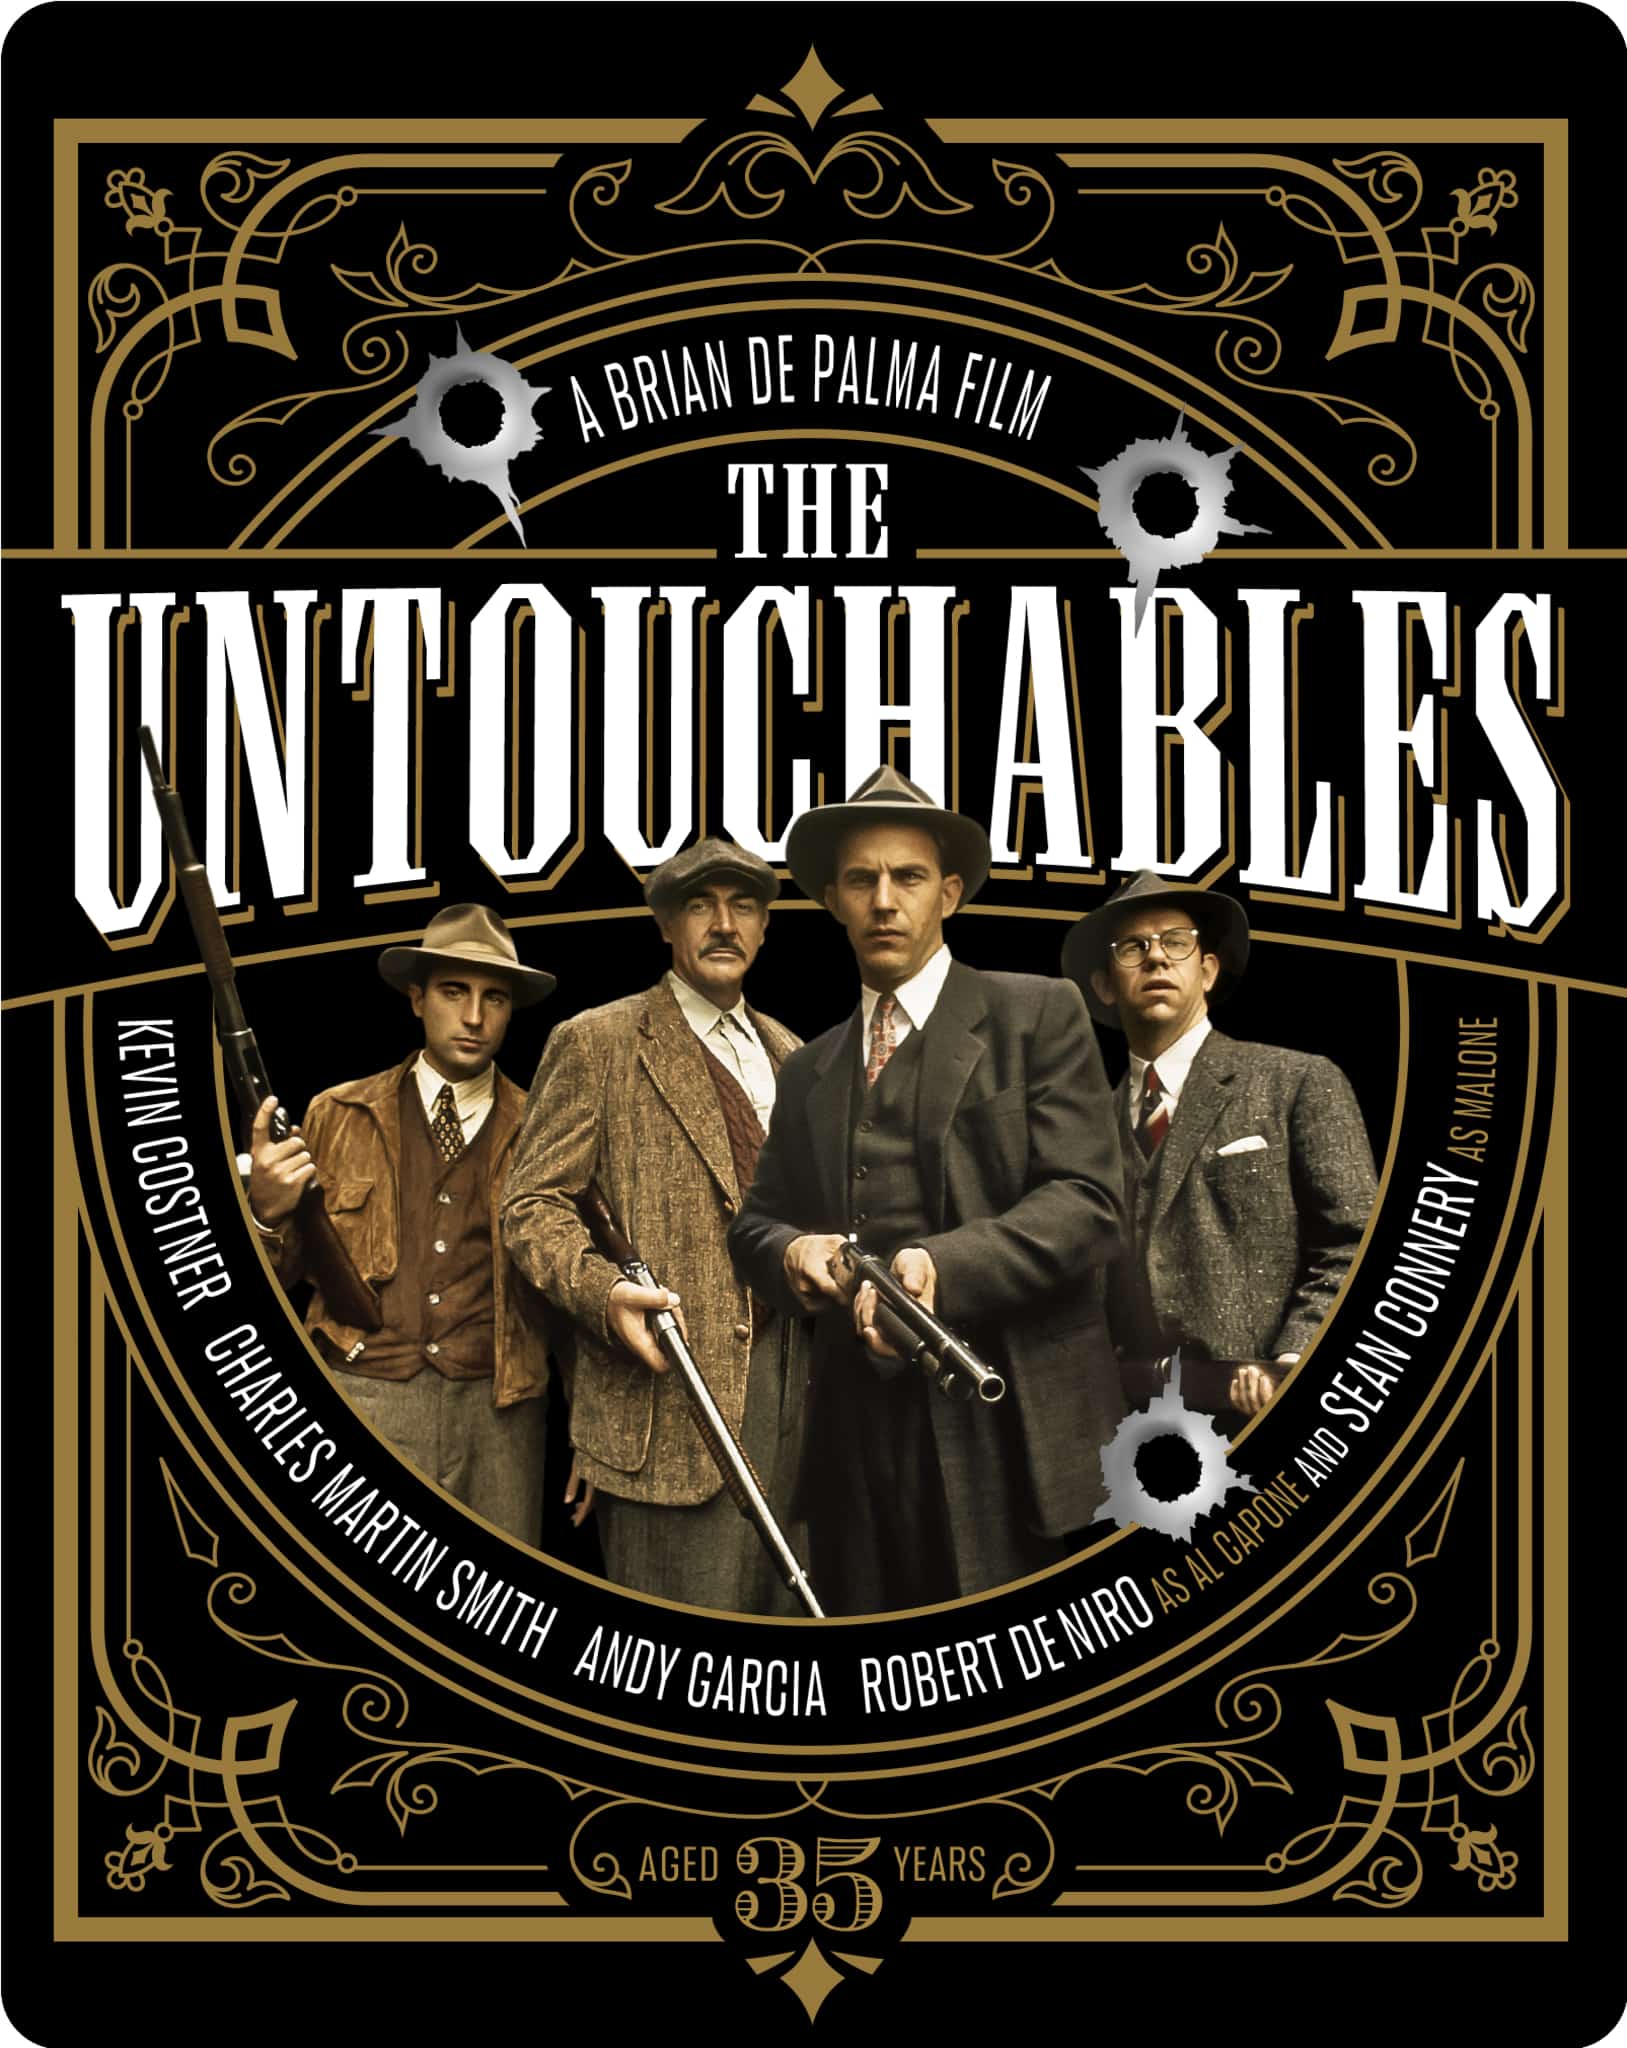 The Untouchables debuts on 4K UHD on May 31st 3